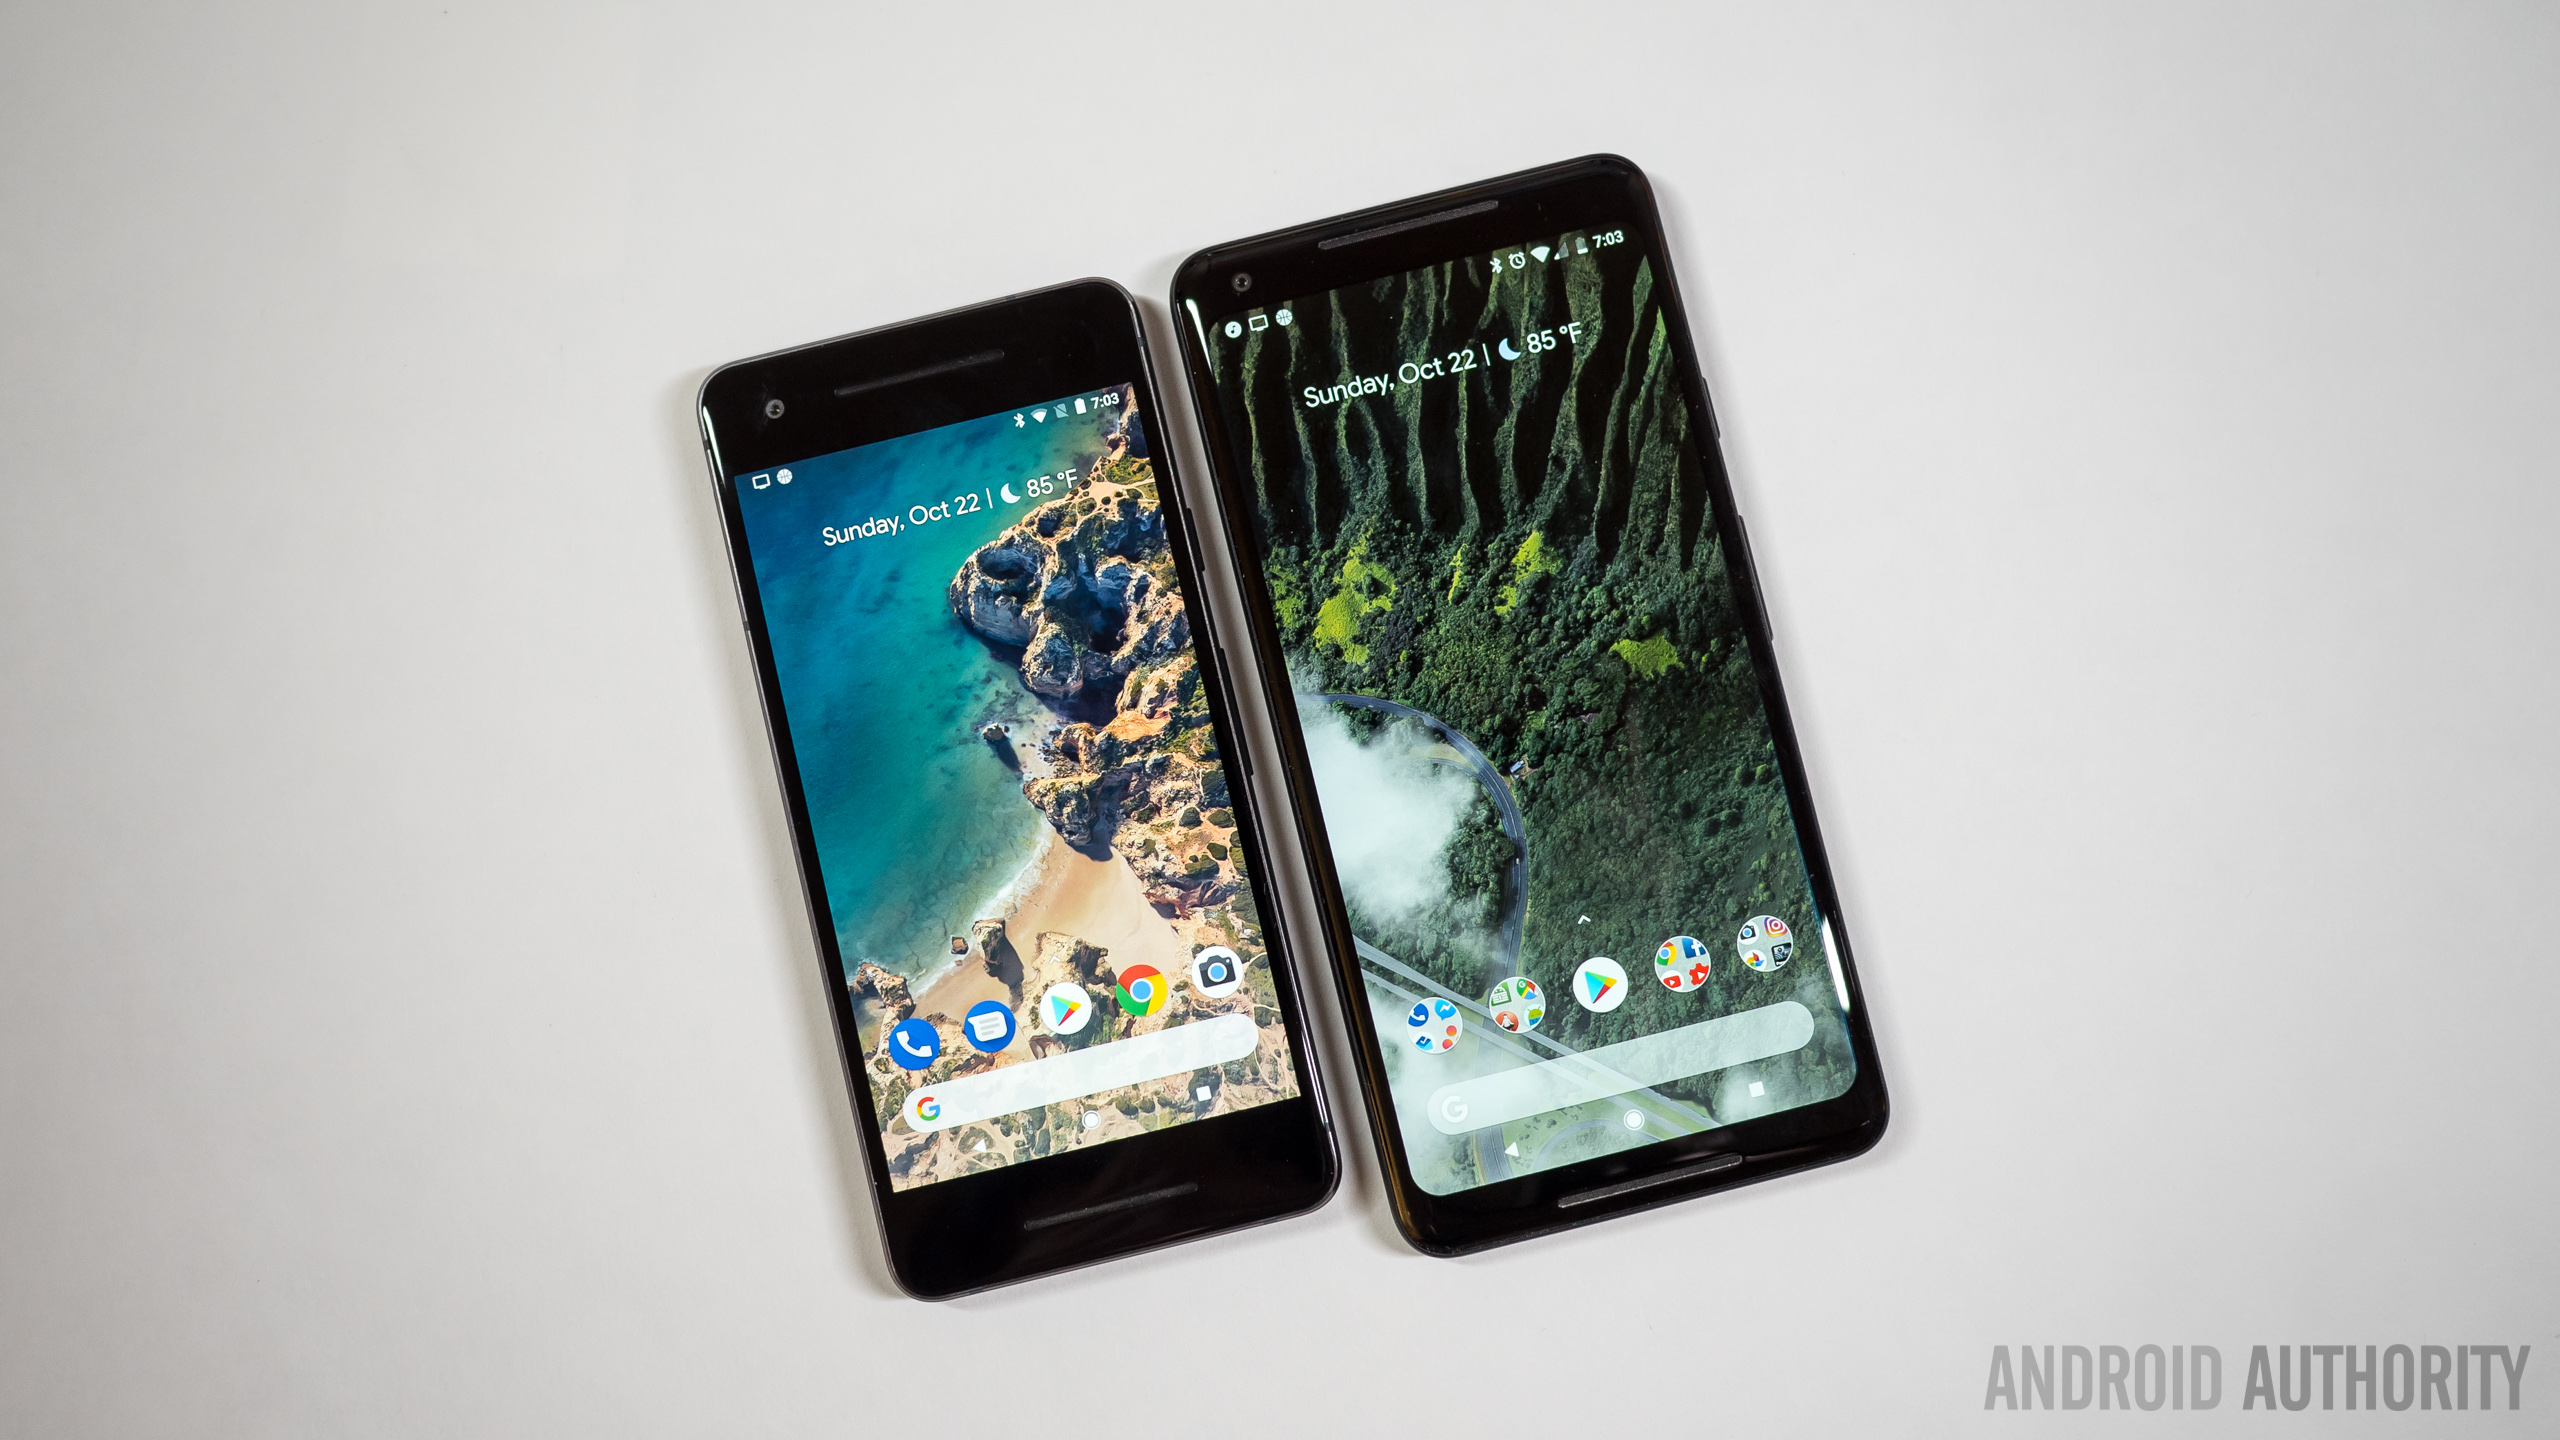 The Google Pixel 2 and the Google Pixel 2 XL, side-by-side, face-up on a white desk.